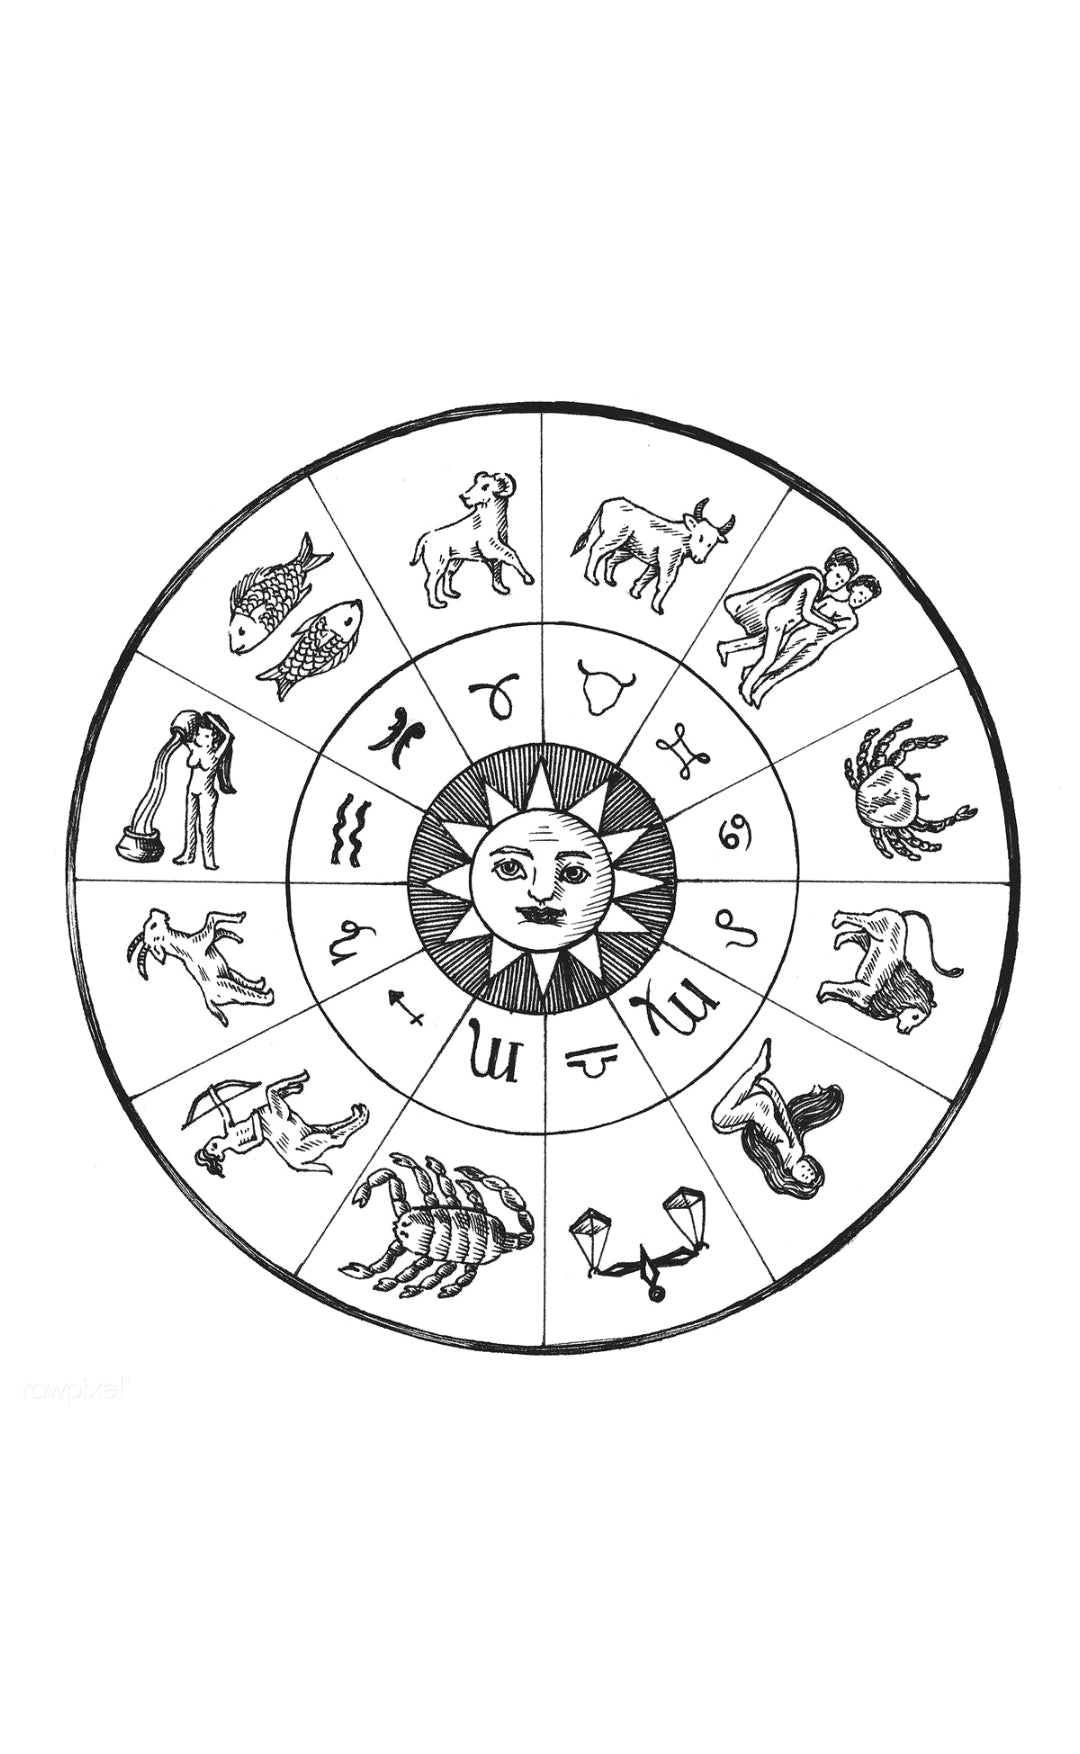 How to interpret your Birth Chart